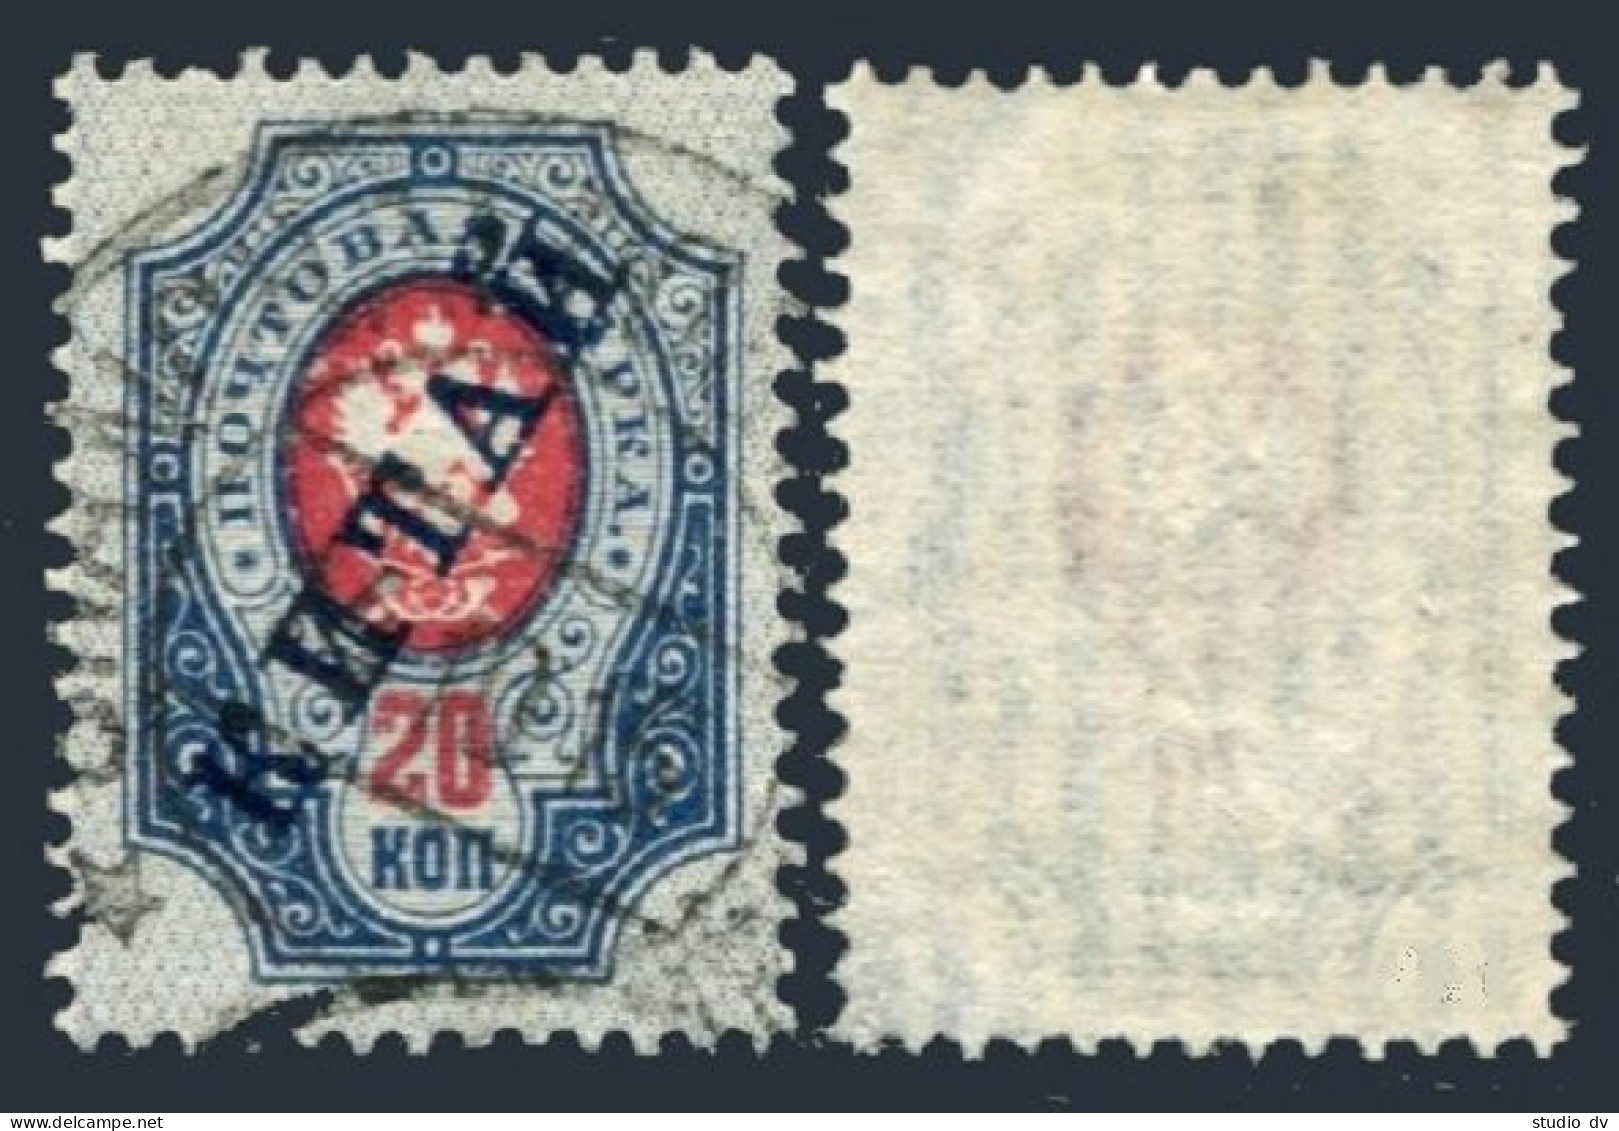 Russian Offices In China 14,used.Michel 10y. 20 Kop.surcharged,1907. - Cina